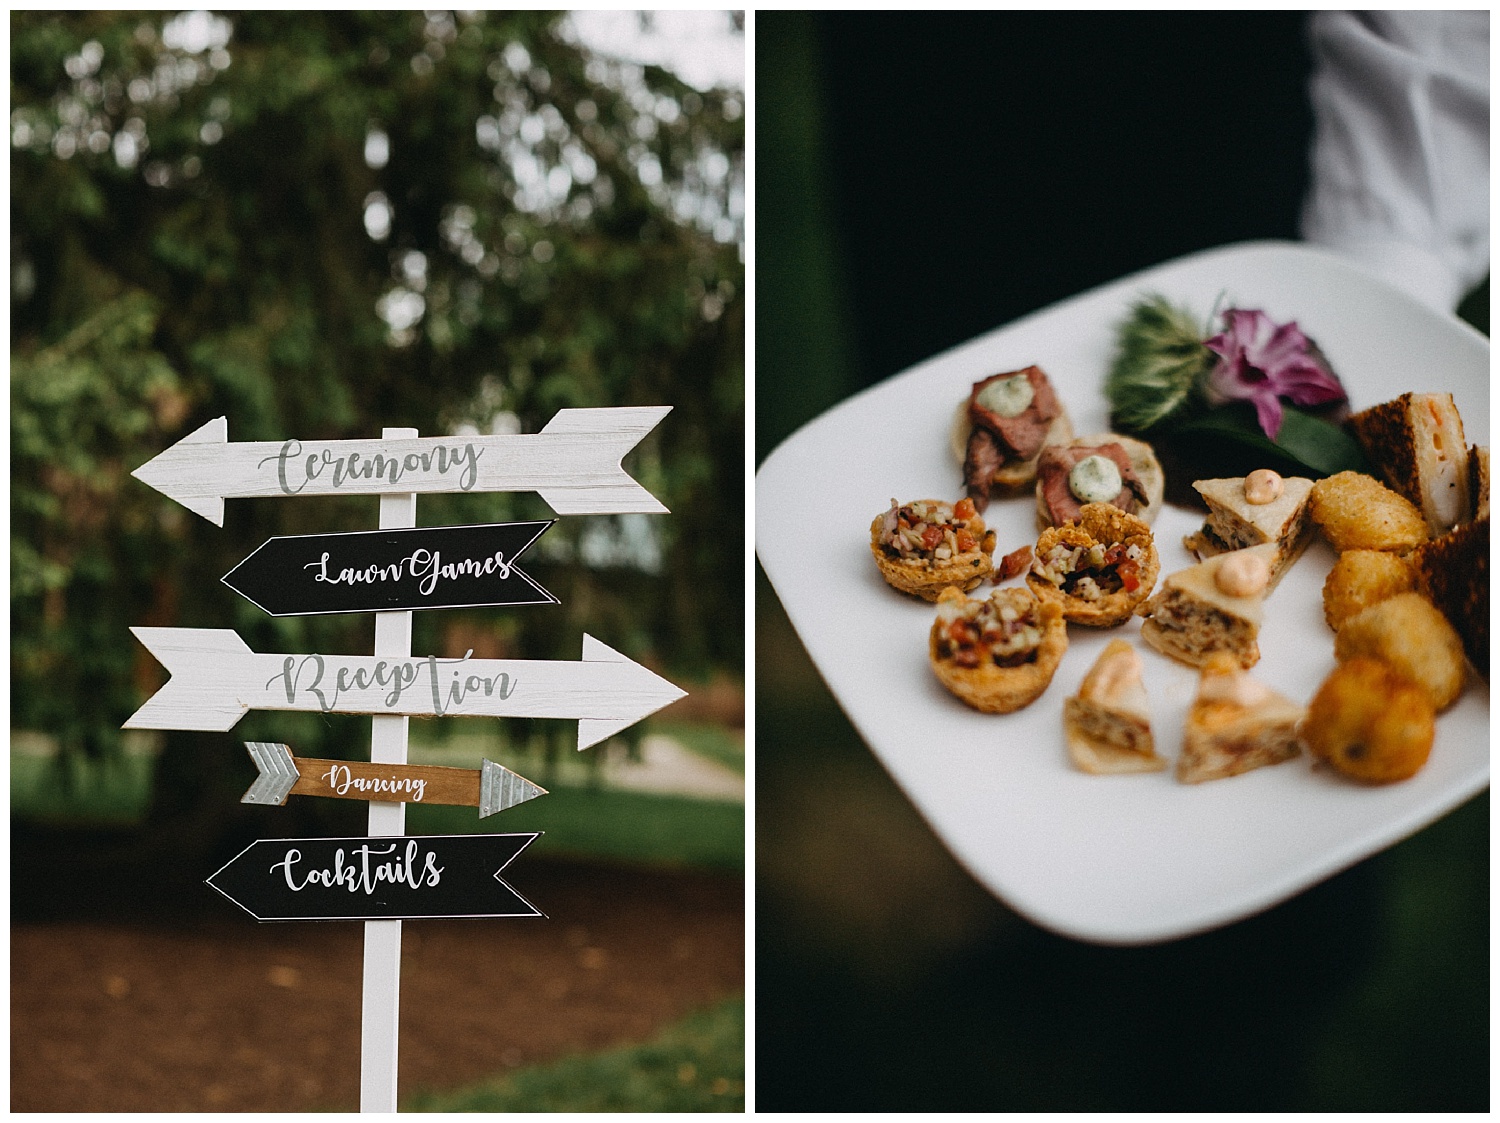 DIY sign and appetizers at Massachusetts wedding